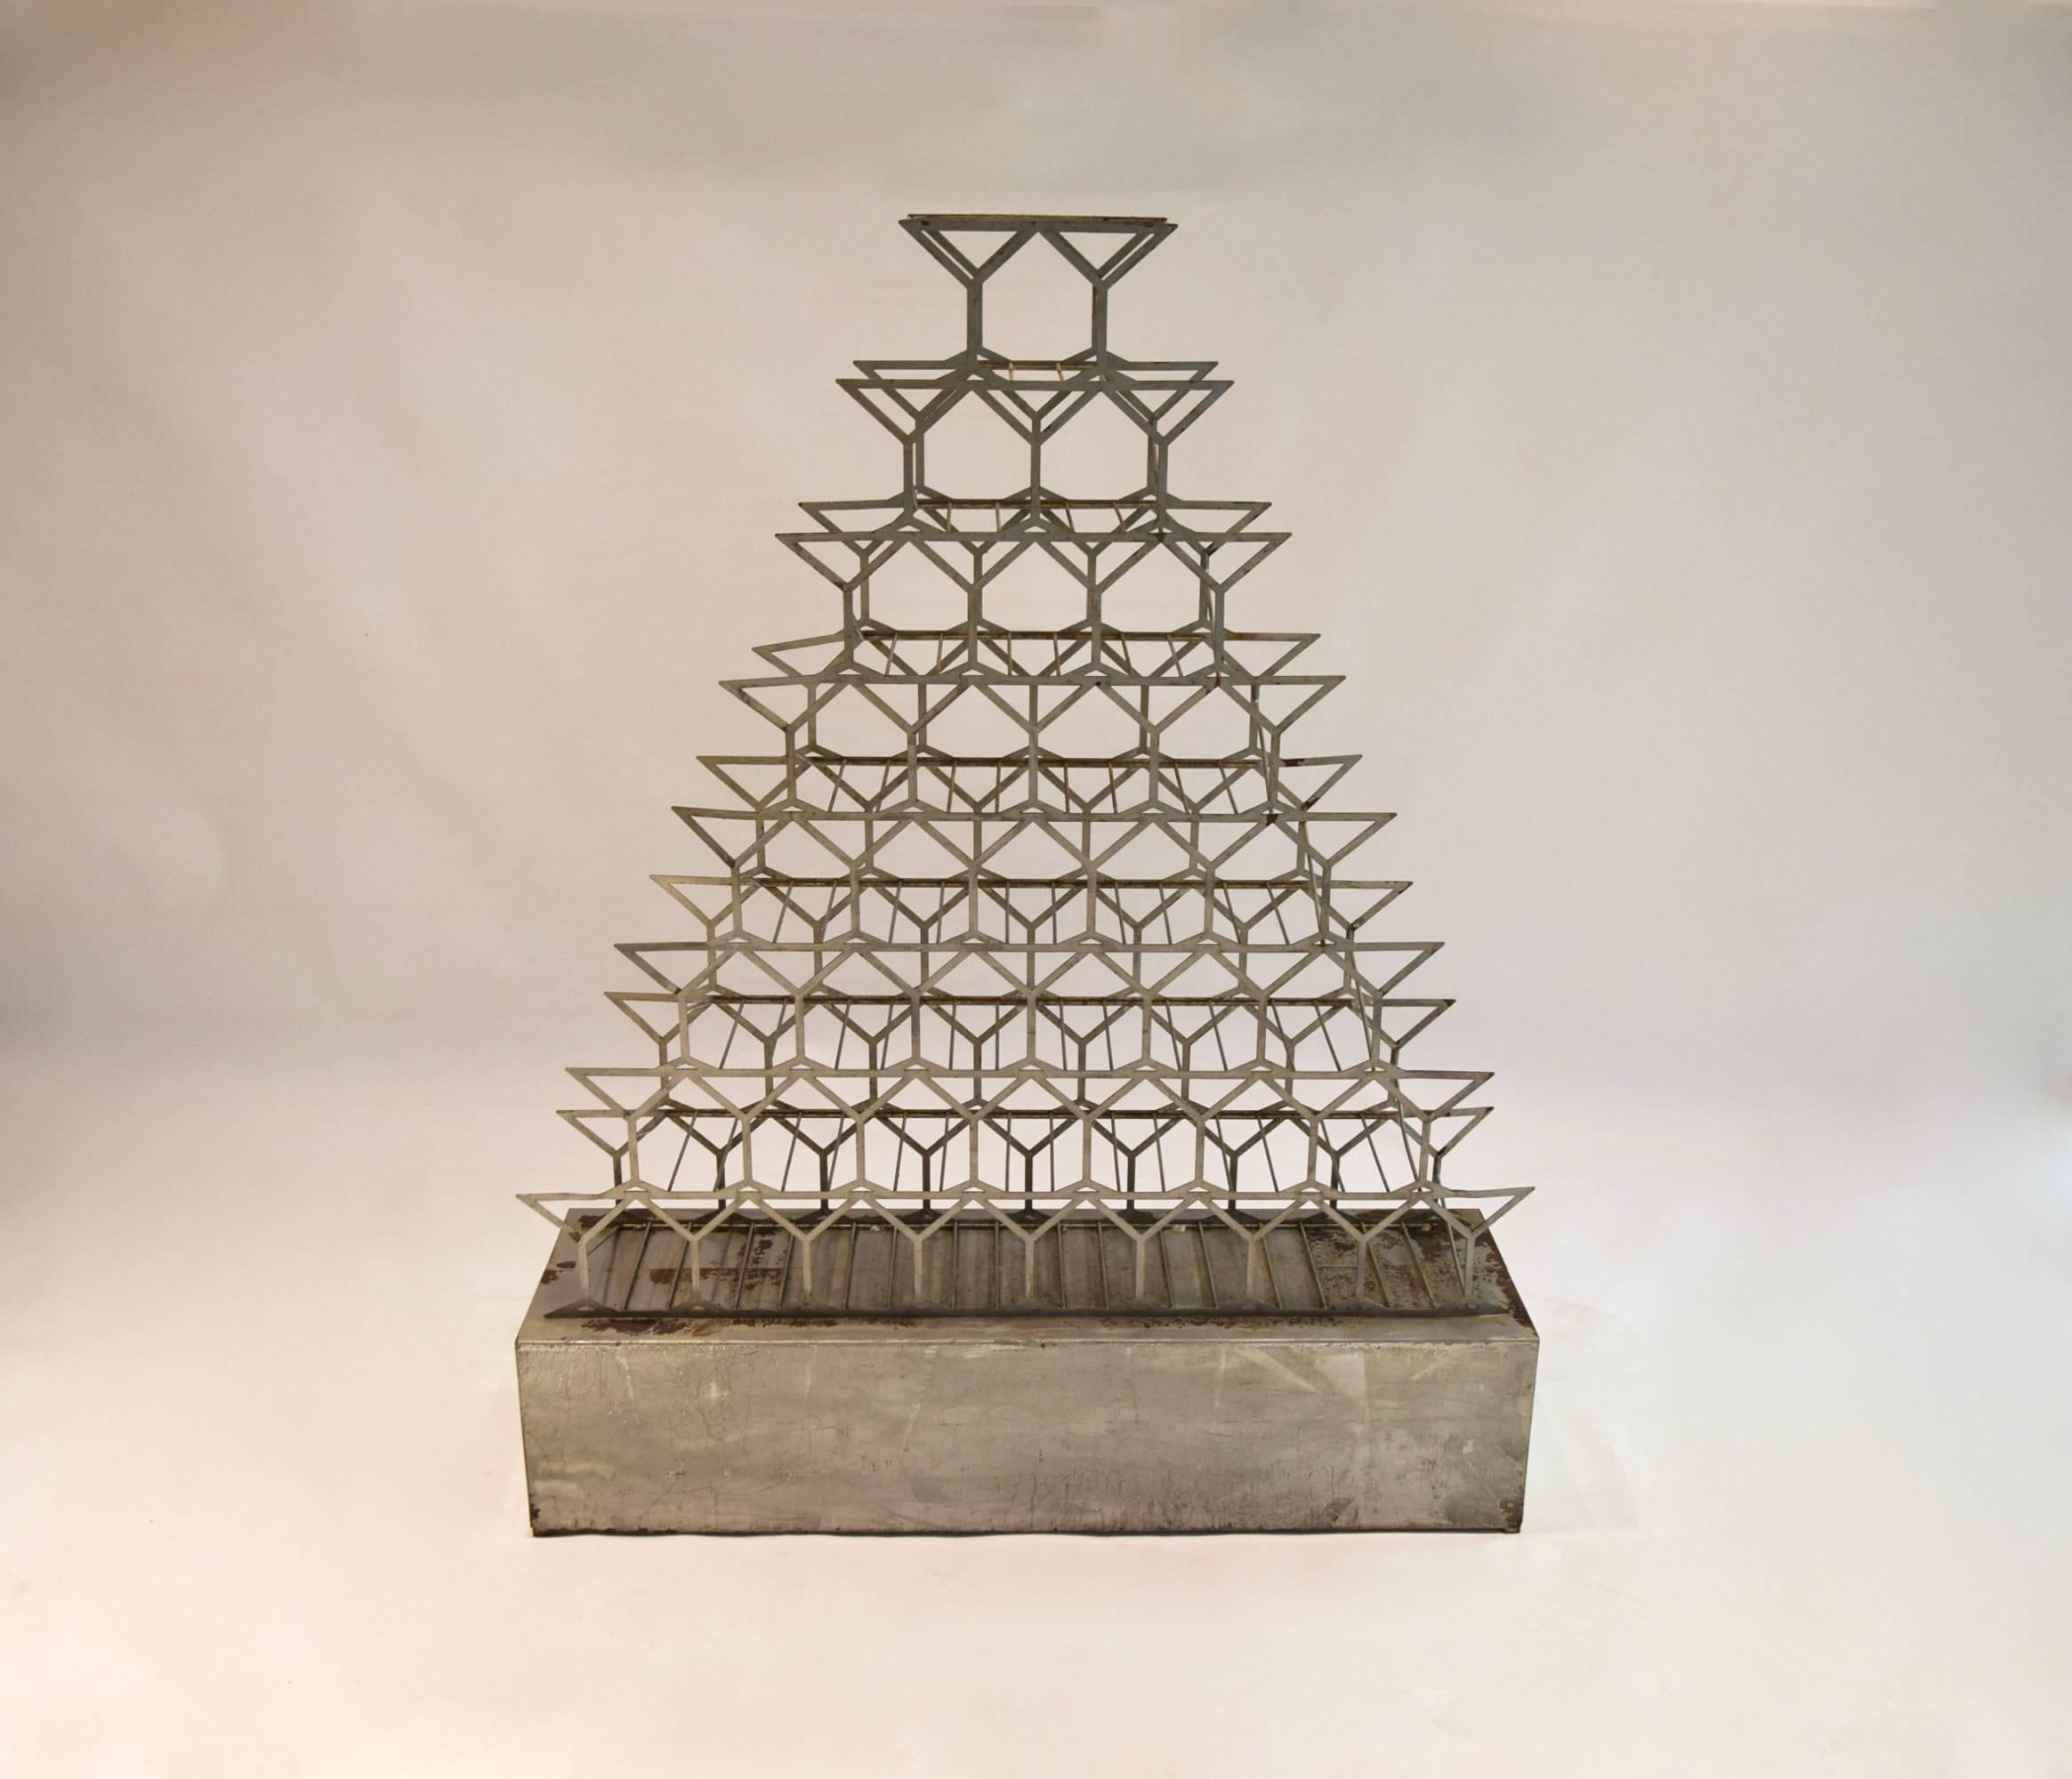 Free  standing wine rack in galvanized steel with 44 stacked champaign glasses on both sides that support each bottle. in very good, original condition.